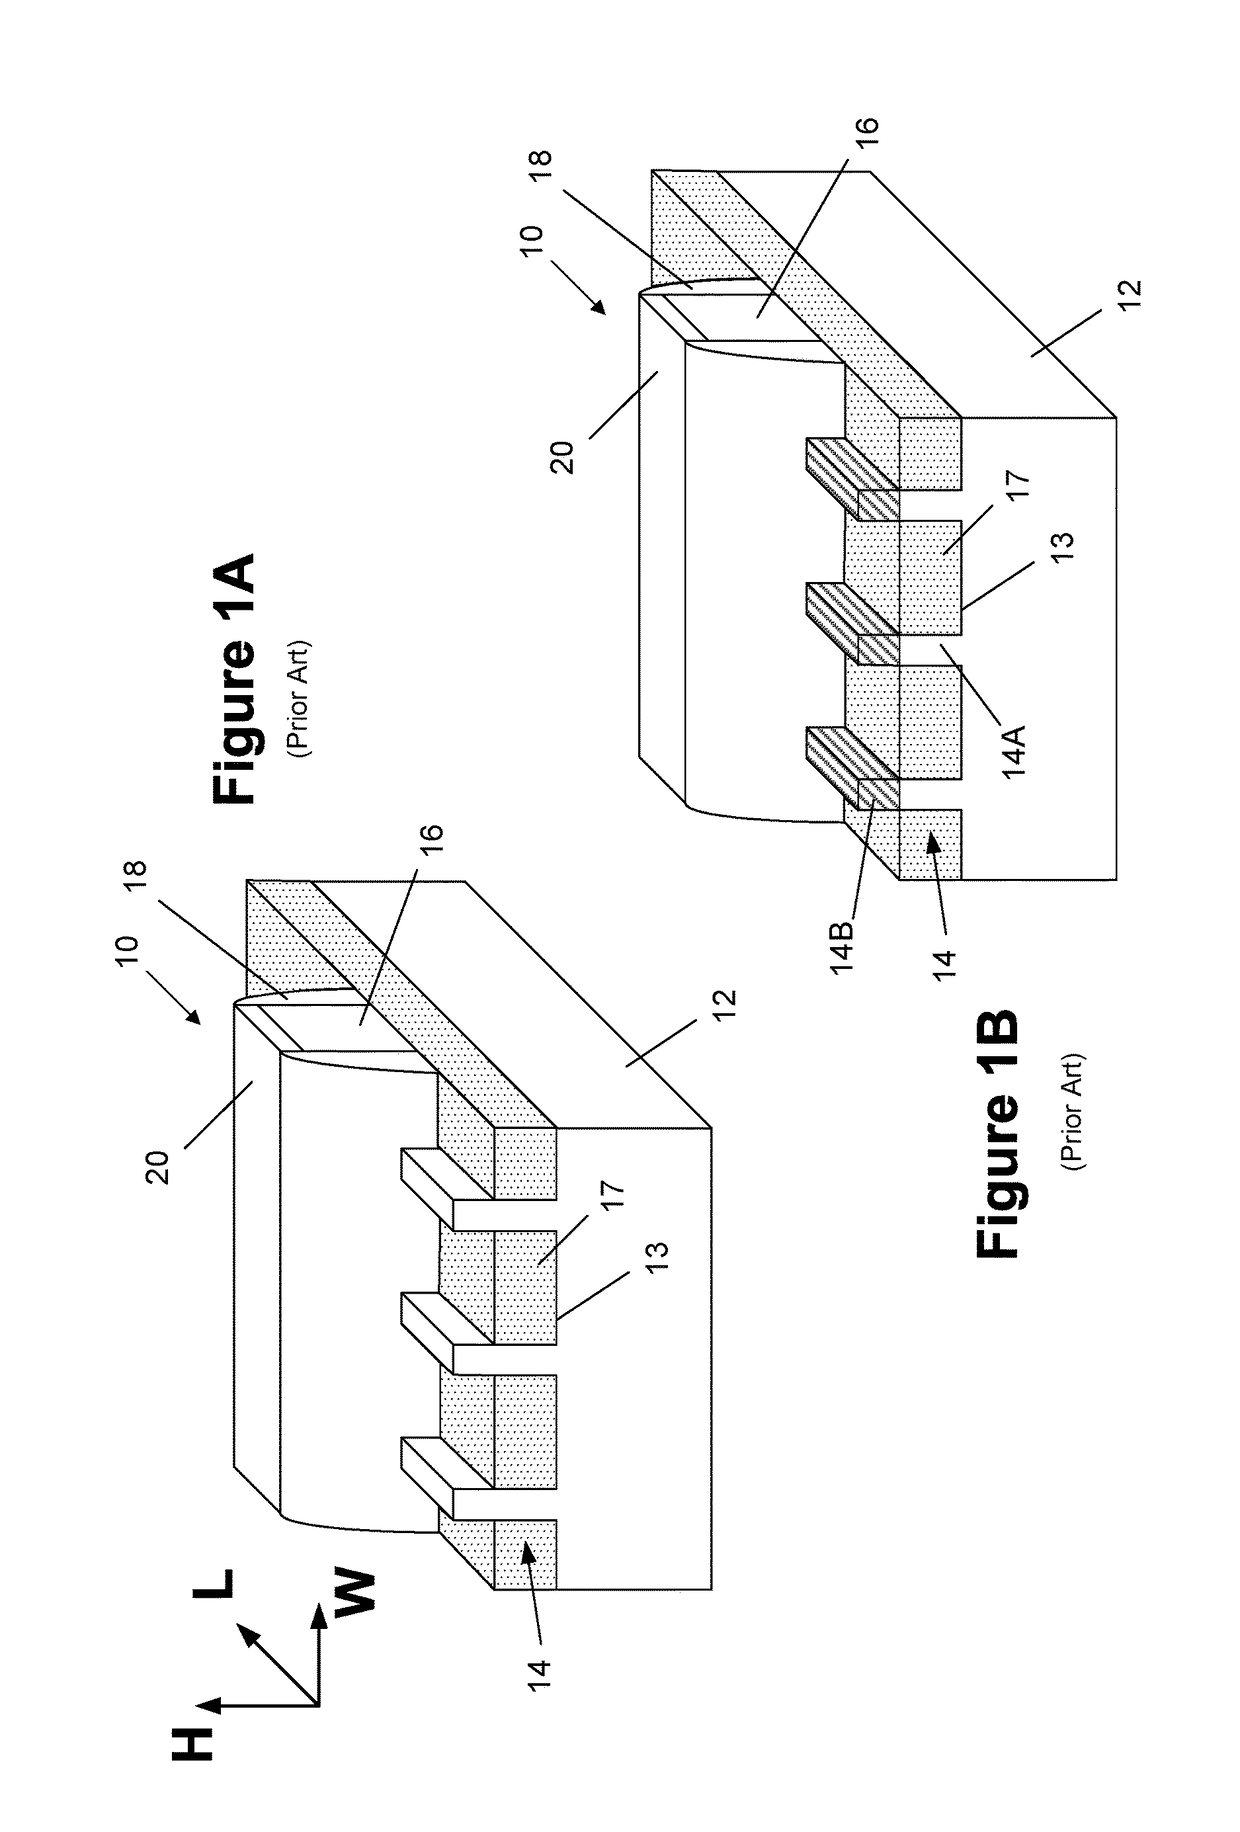 Single and double diffusion breaks on integrated circuit products comprised of finfet devices